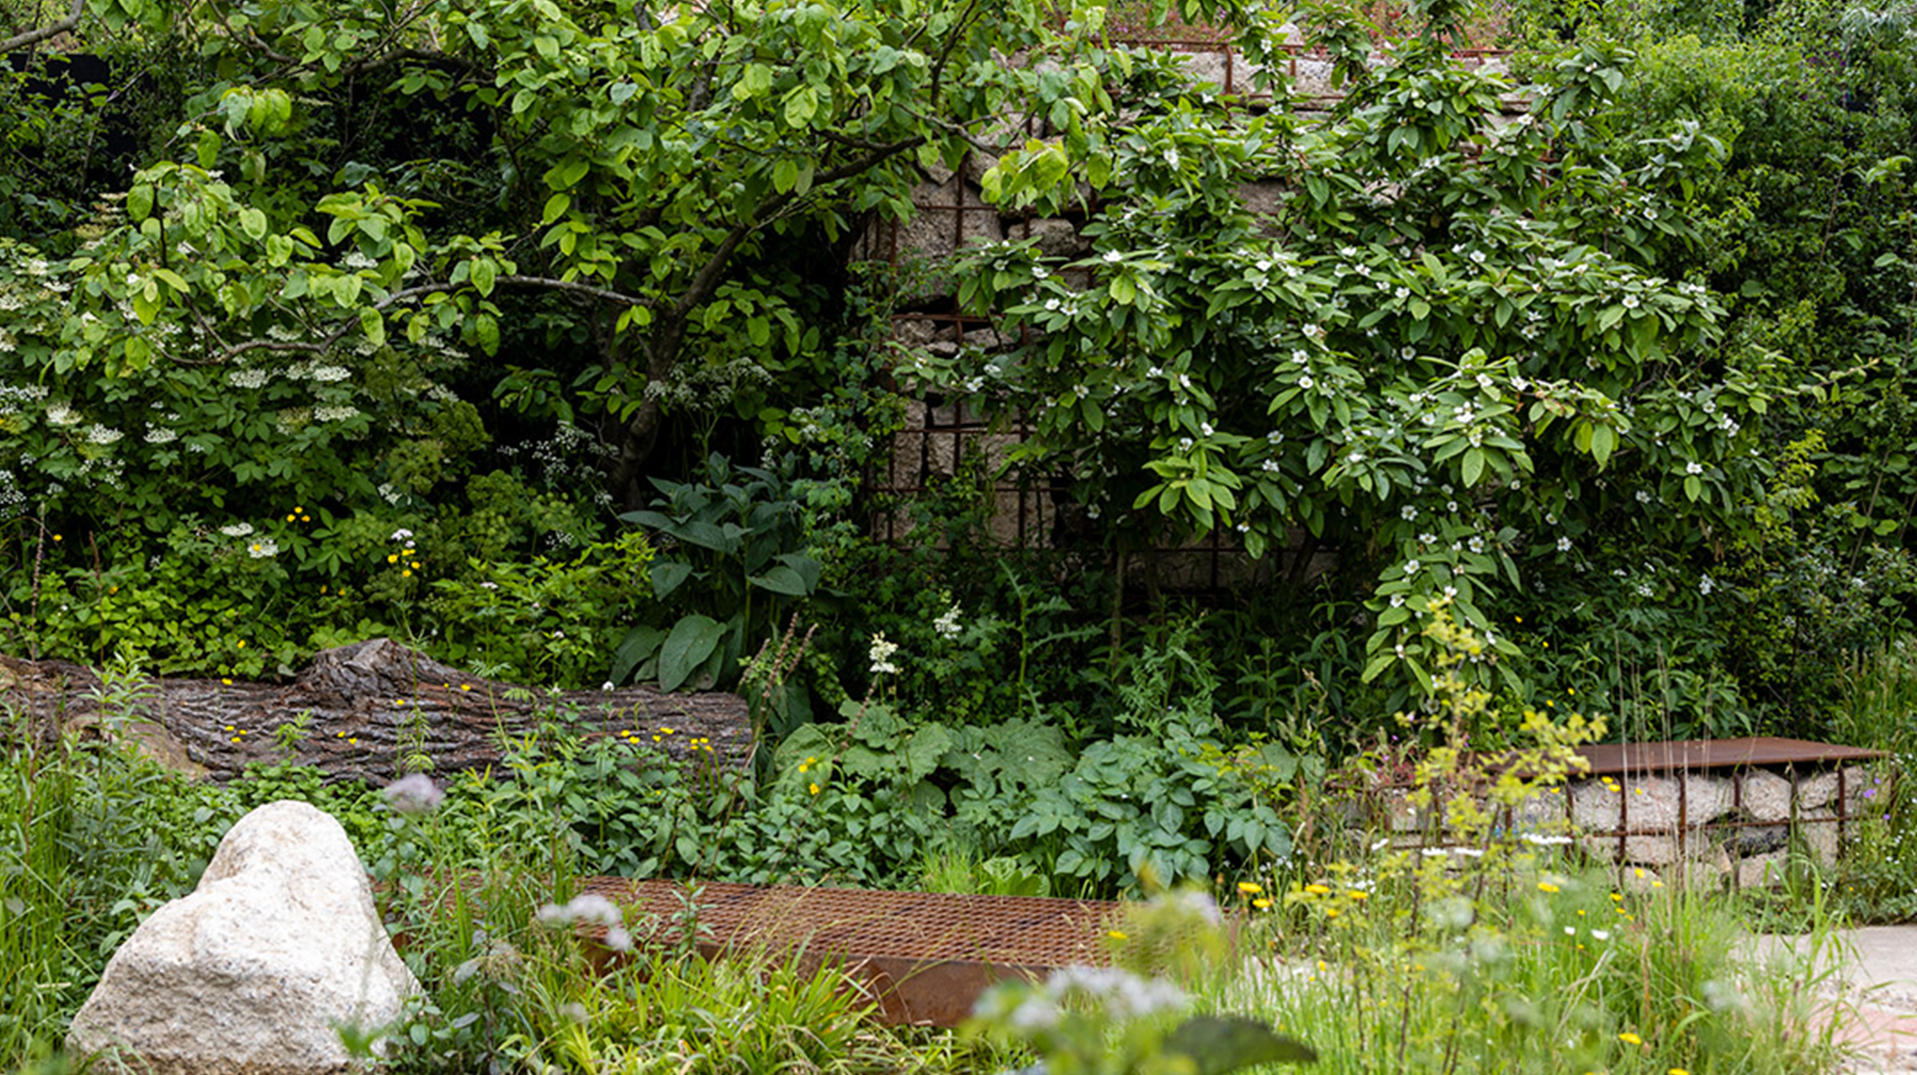 A look at one of the Balance Garden's natural areas at the Chelsea Garden Show.